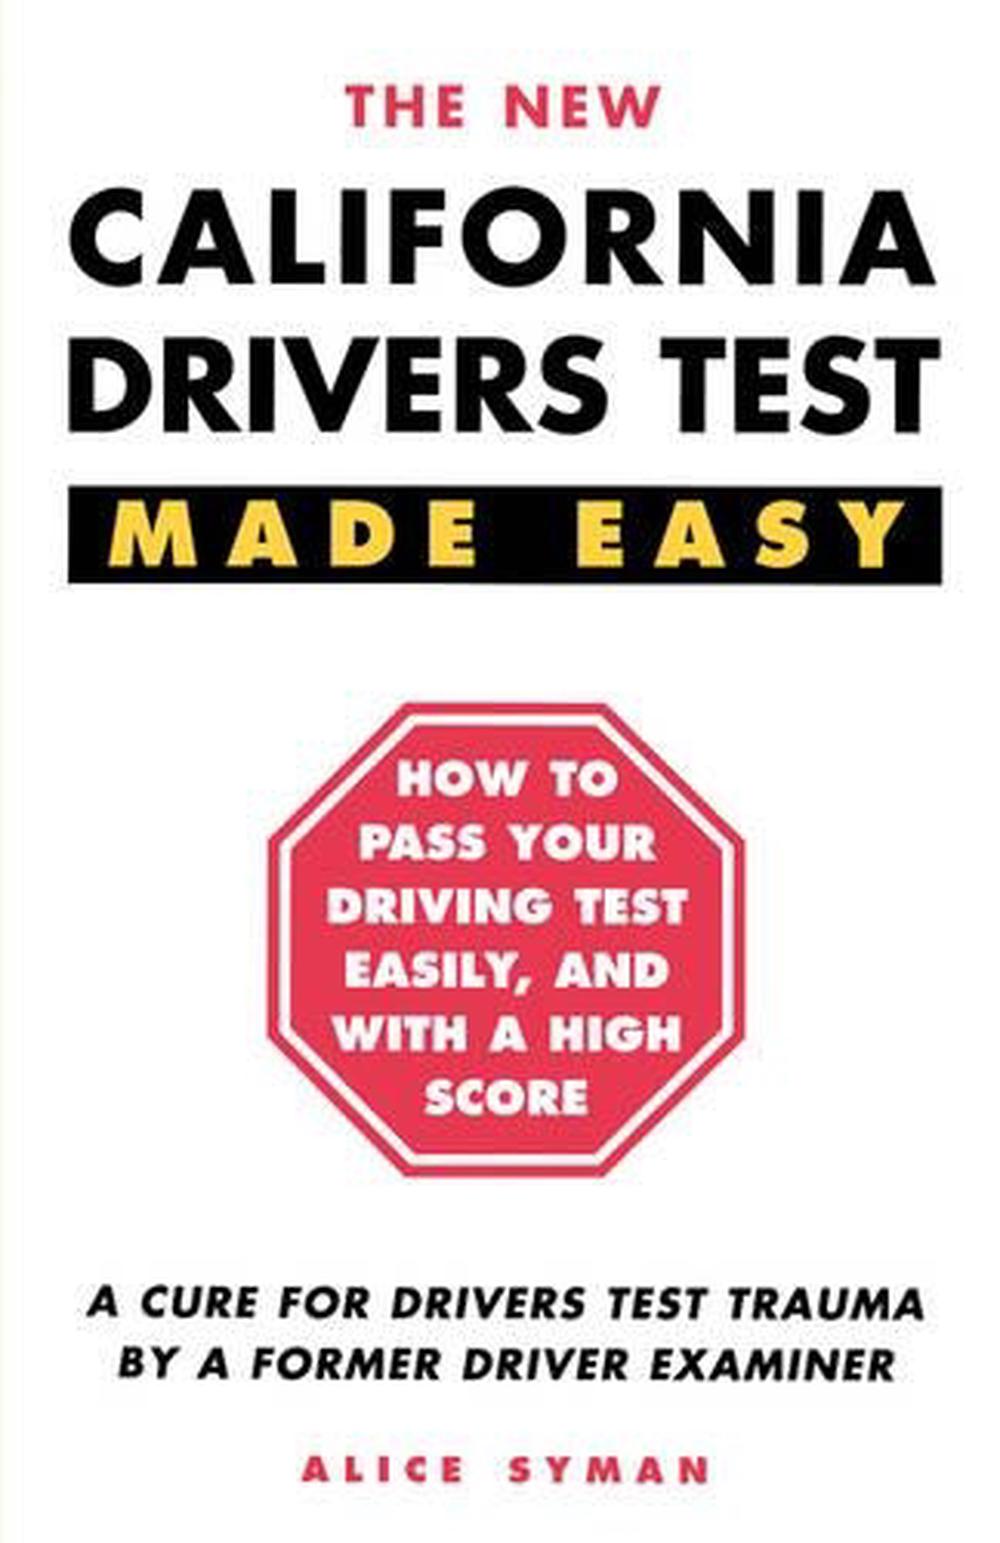 california drivers test tips